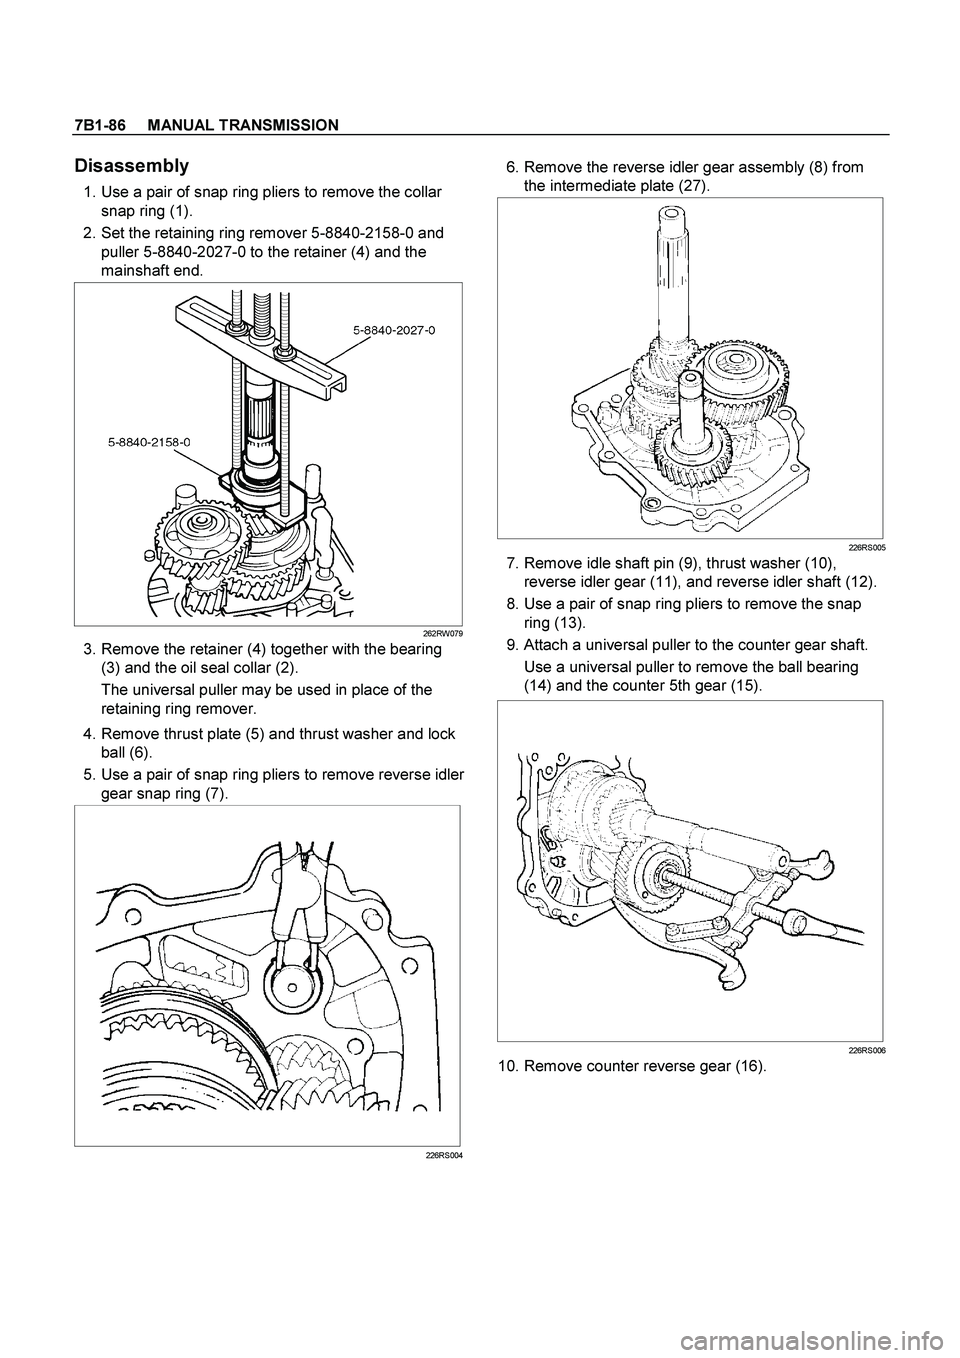 ISUZU TF SERIES 2004  Workshop Manual 7B1-86     MANUAL TRANSMISSION
 
Disassembly 
  1. Use a pair of snap ring pliers to remove the collar 
snap ring (1). 
  2. Set the retaining ring remover 5-8840-2158-0 and 
puller 5-8840-2027-0 to t